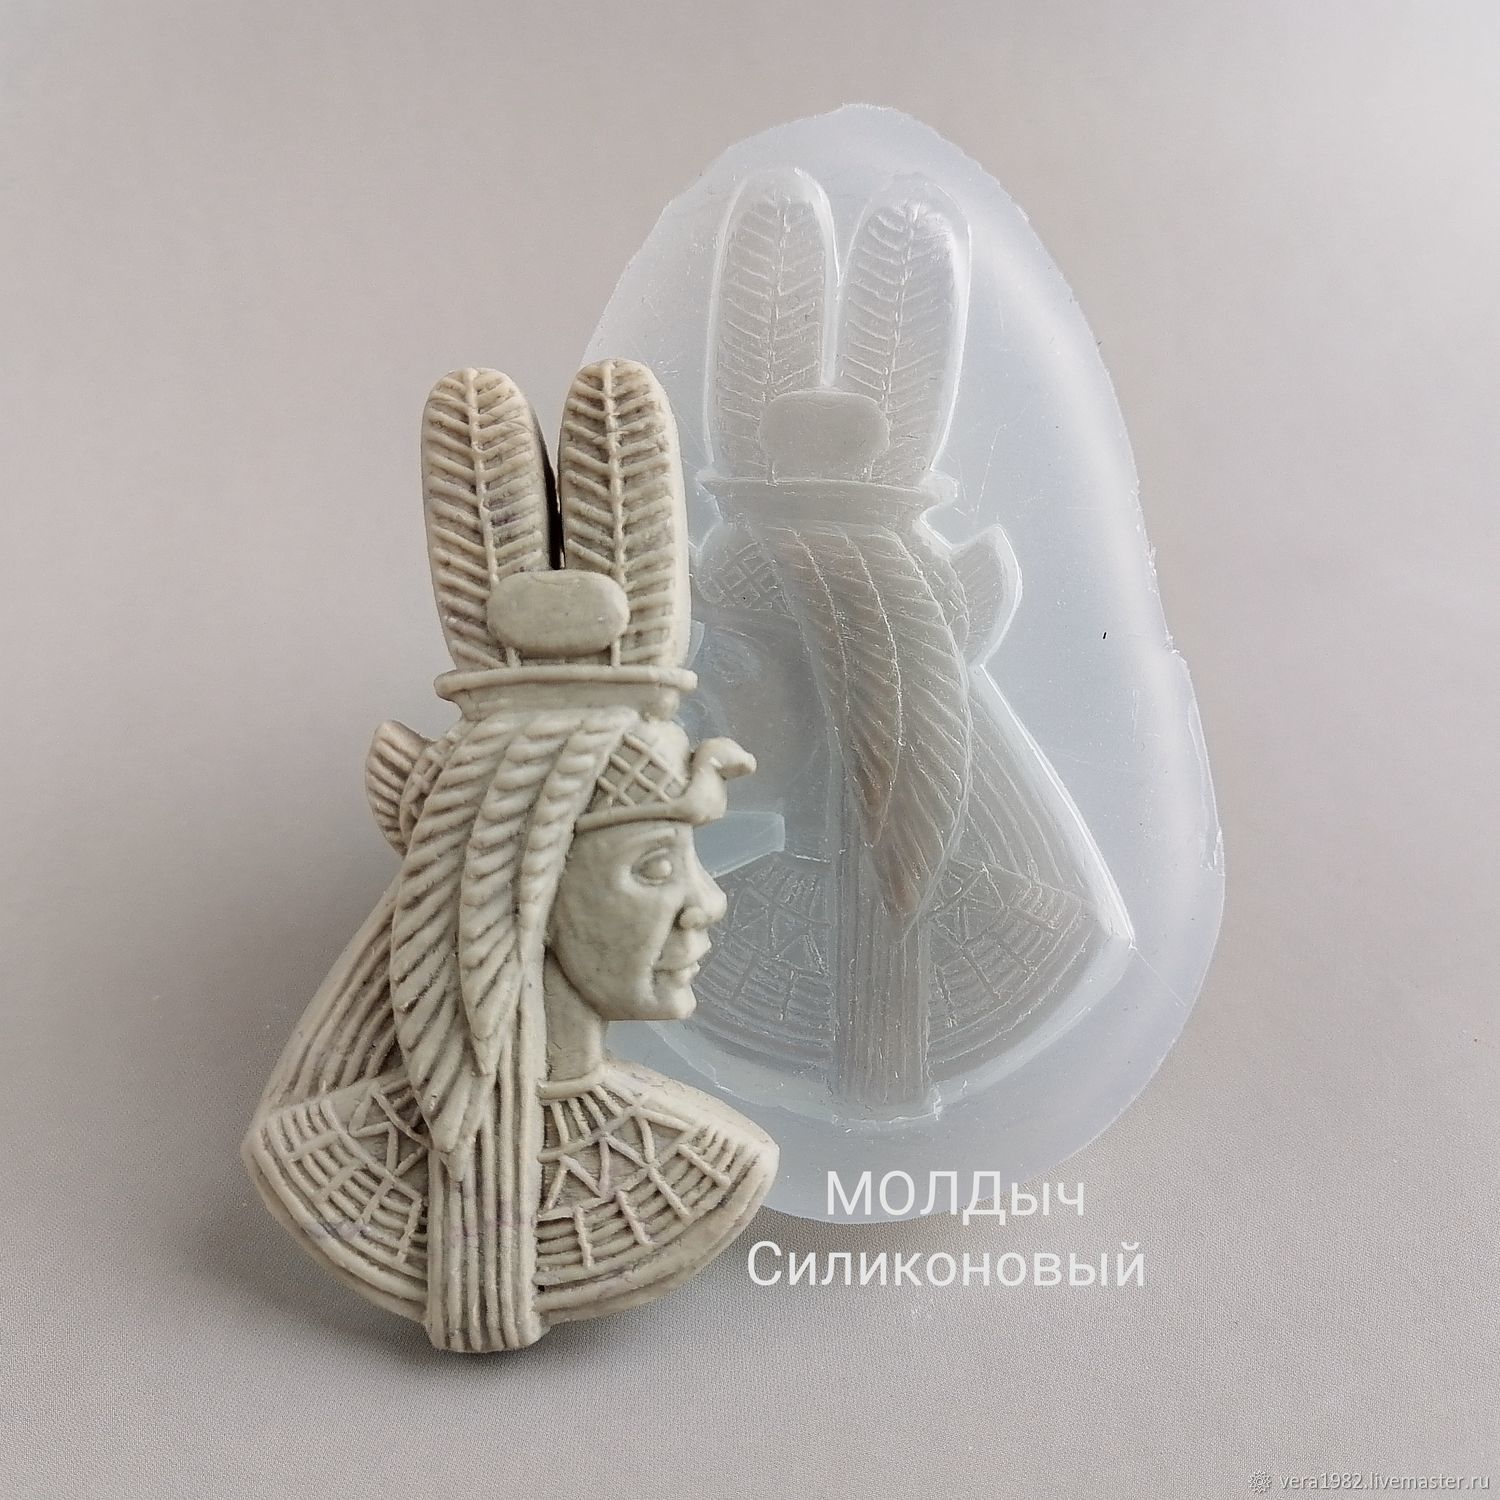 Mold Pharaoh. 7,5 x 4 x 0,5cm Silicone mold, Elements for decoupage and painting, Odintsovo,  Фото №1